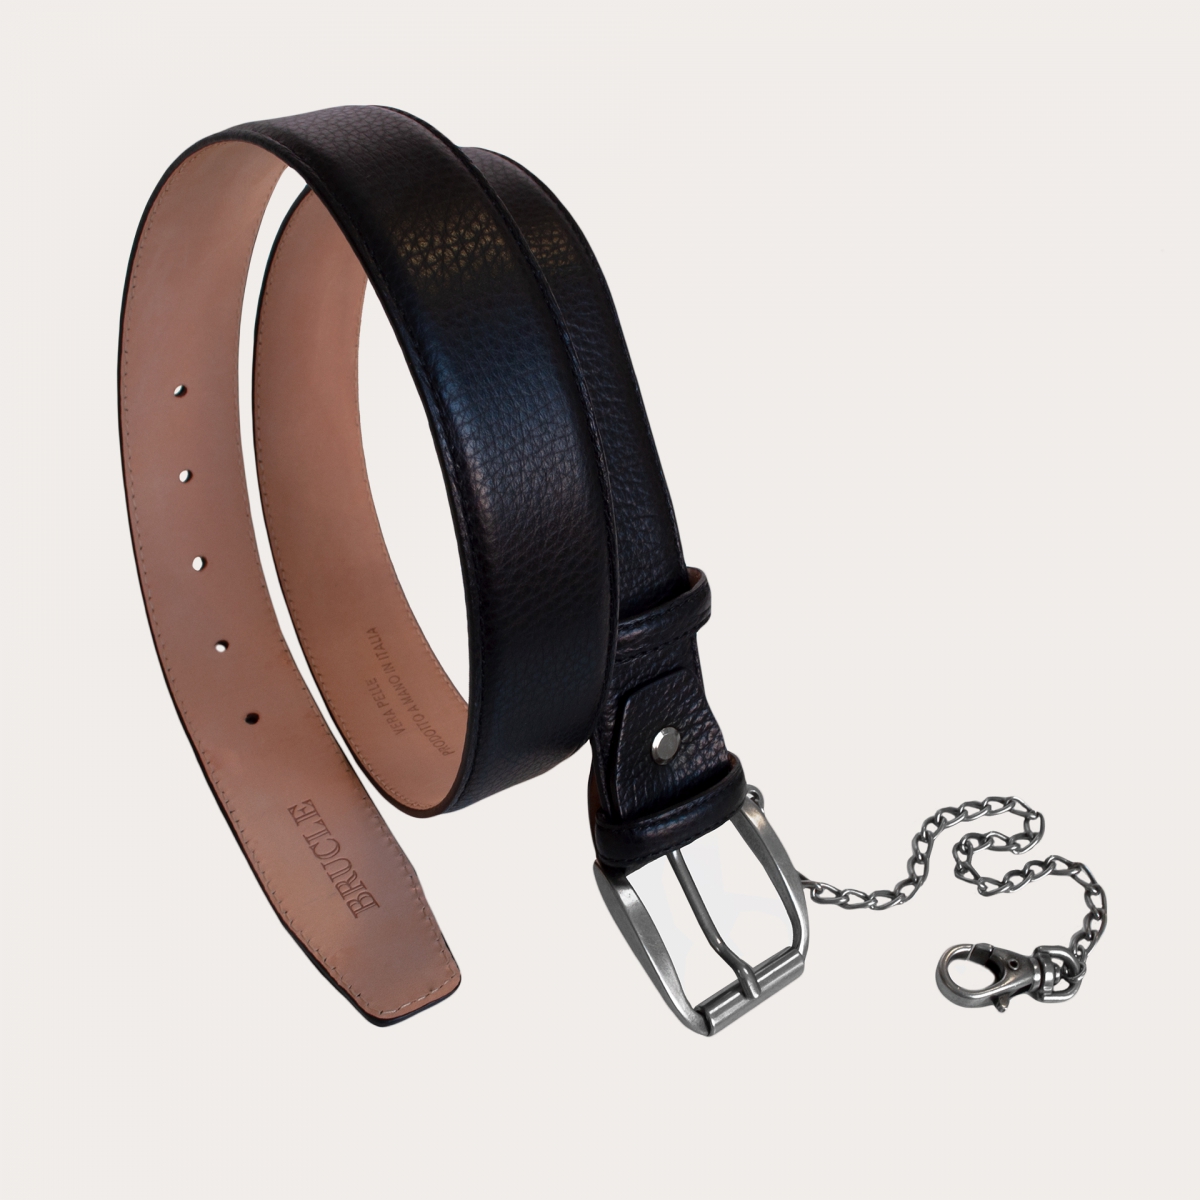 BRUCLE Elk print leather belt, black with buckle with chain